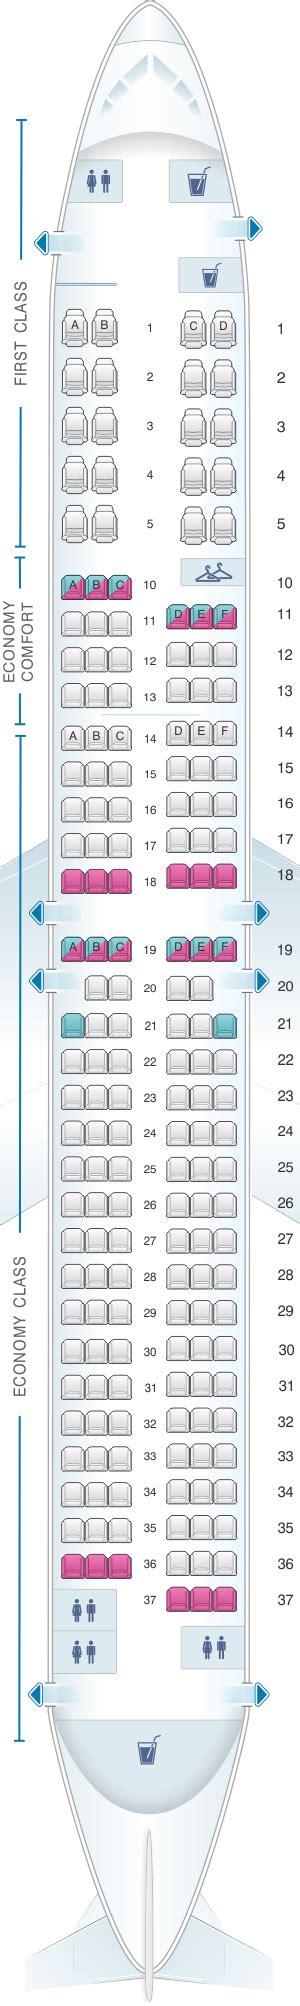 Boeing 737 900 Seating Arrangement Awesome Home